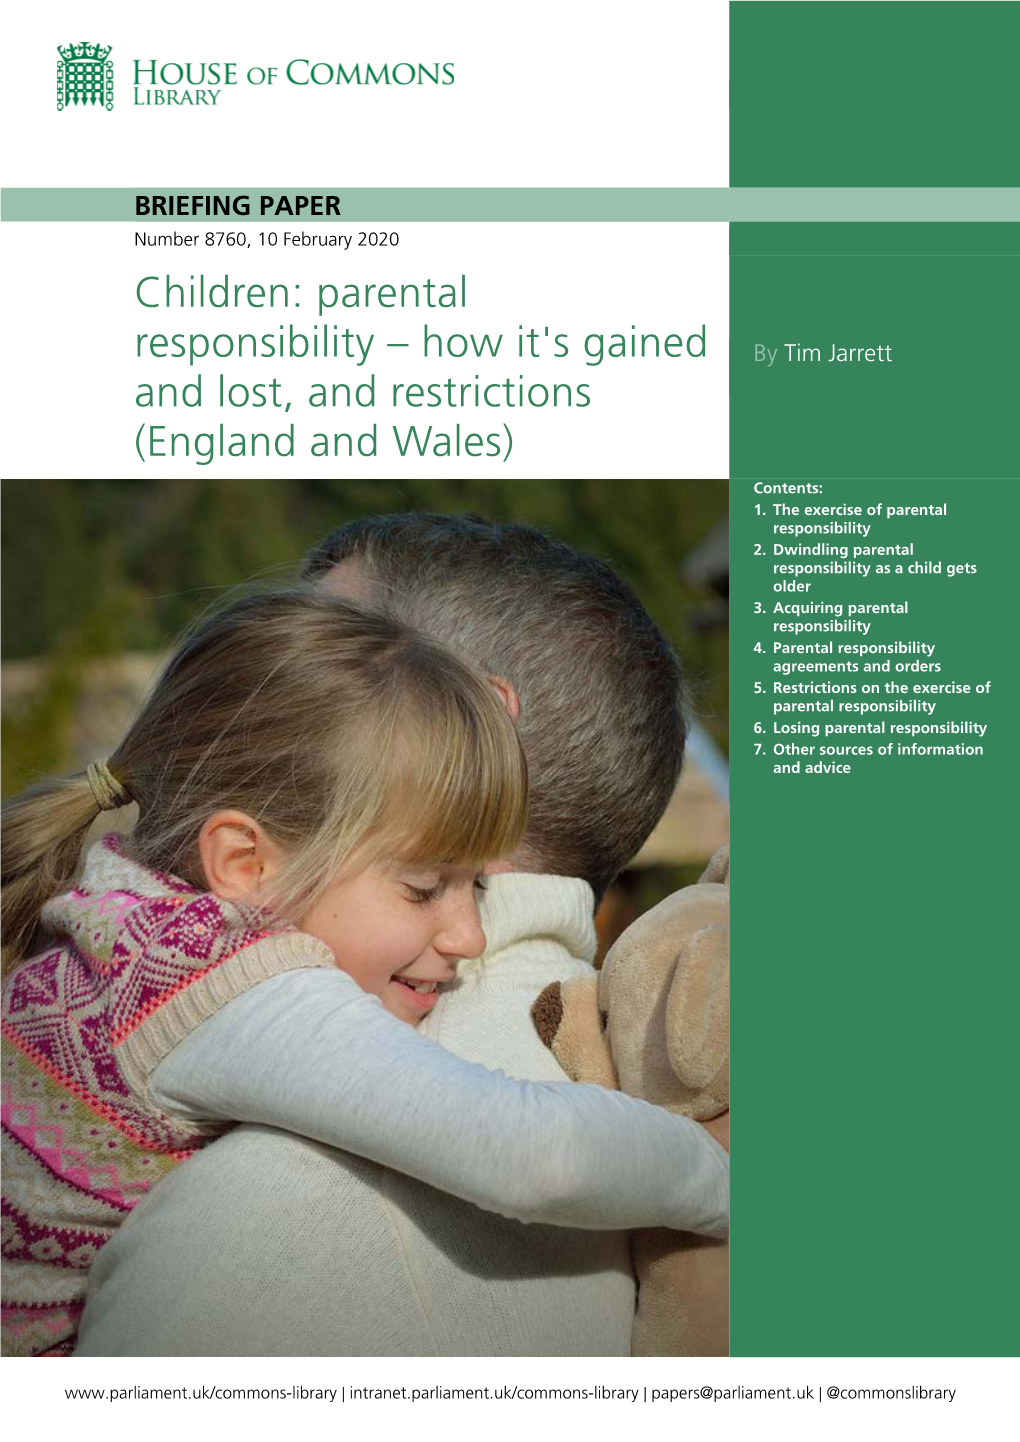 Children: Parental Responsibility – How It's Gained and Lost, and Restrictions (England and Wales)